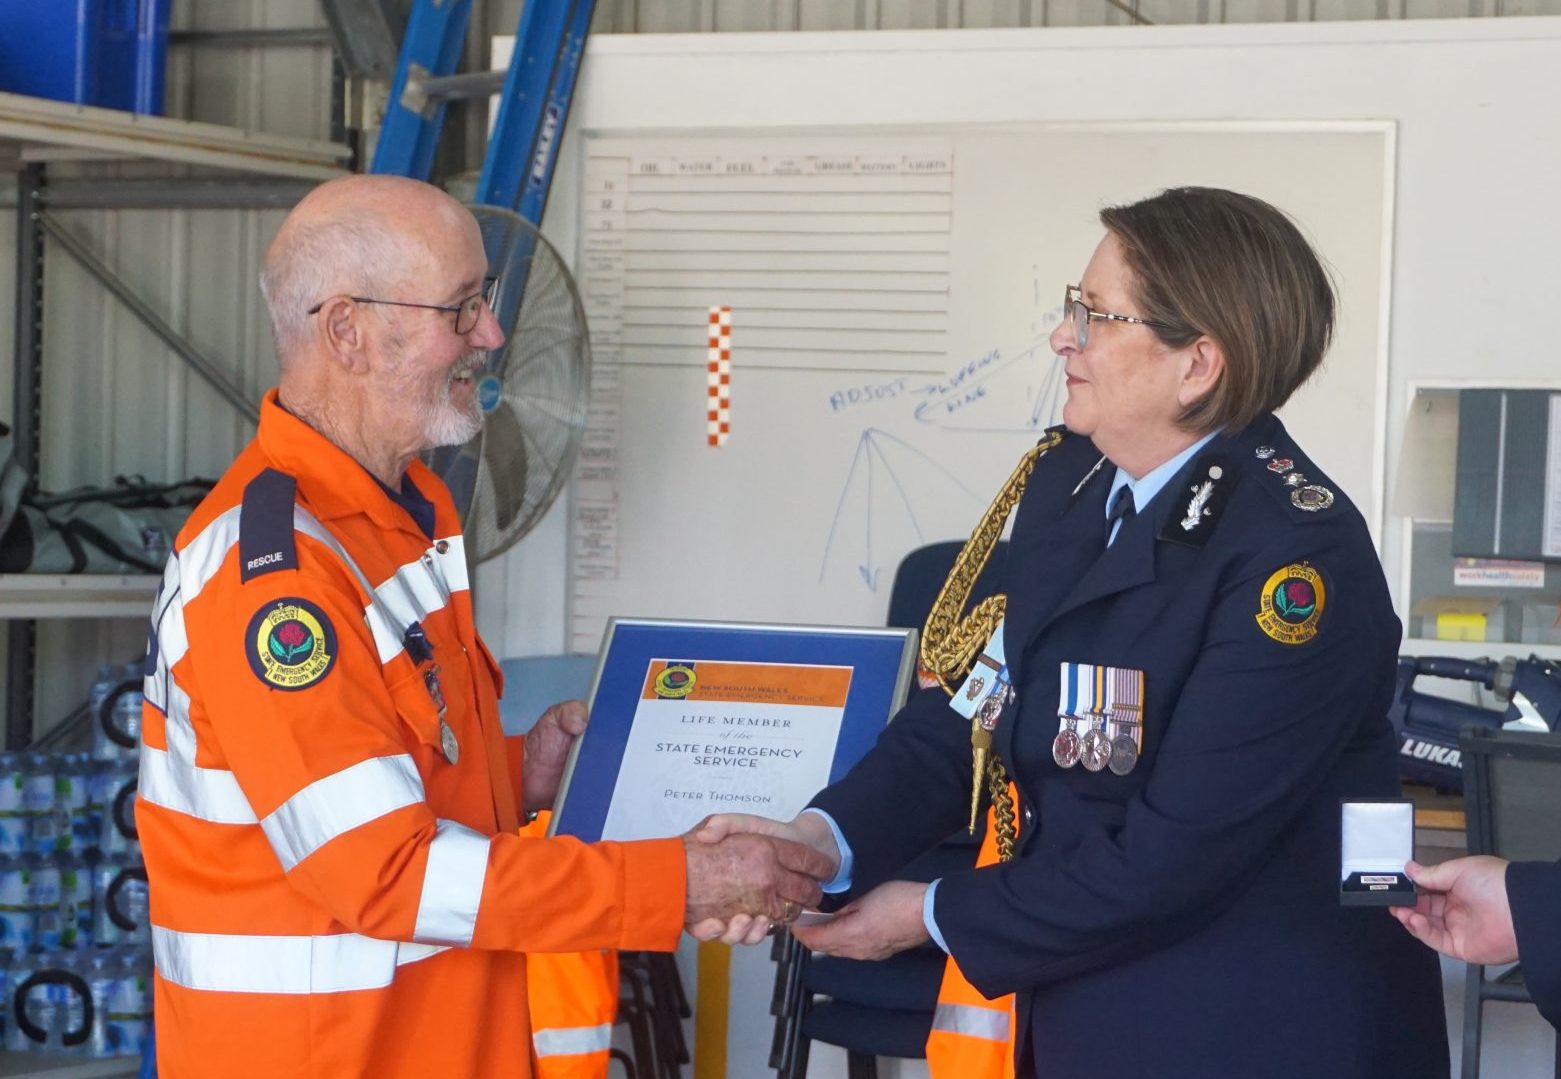 Pete Thomson acknowledged for life commitment to SES